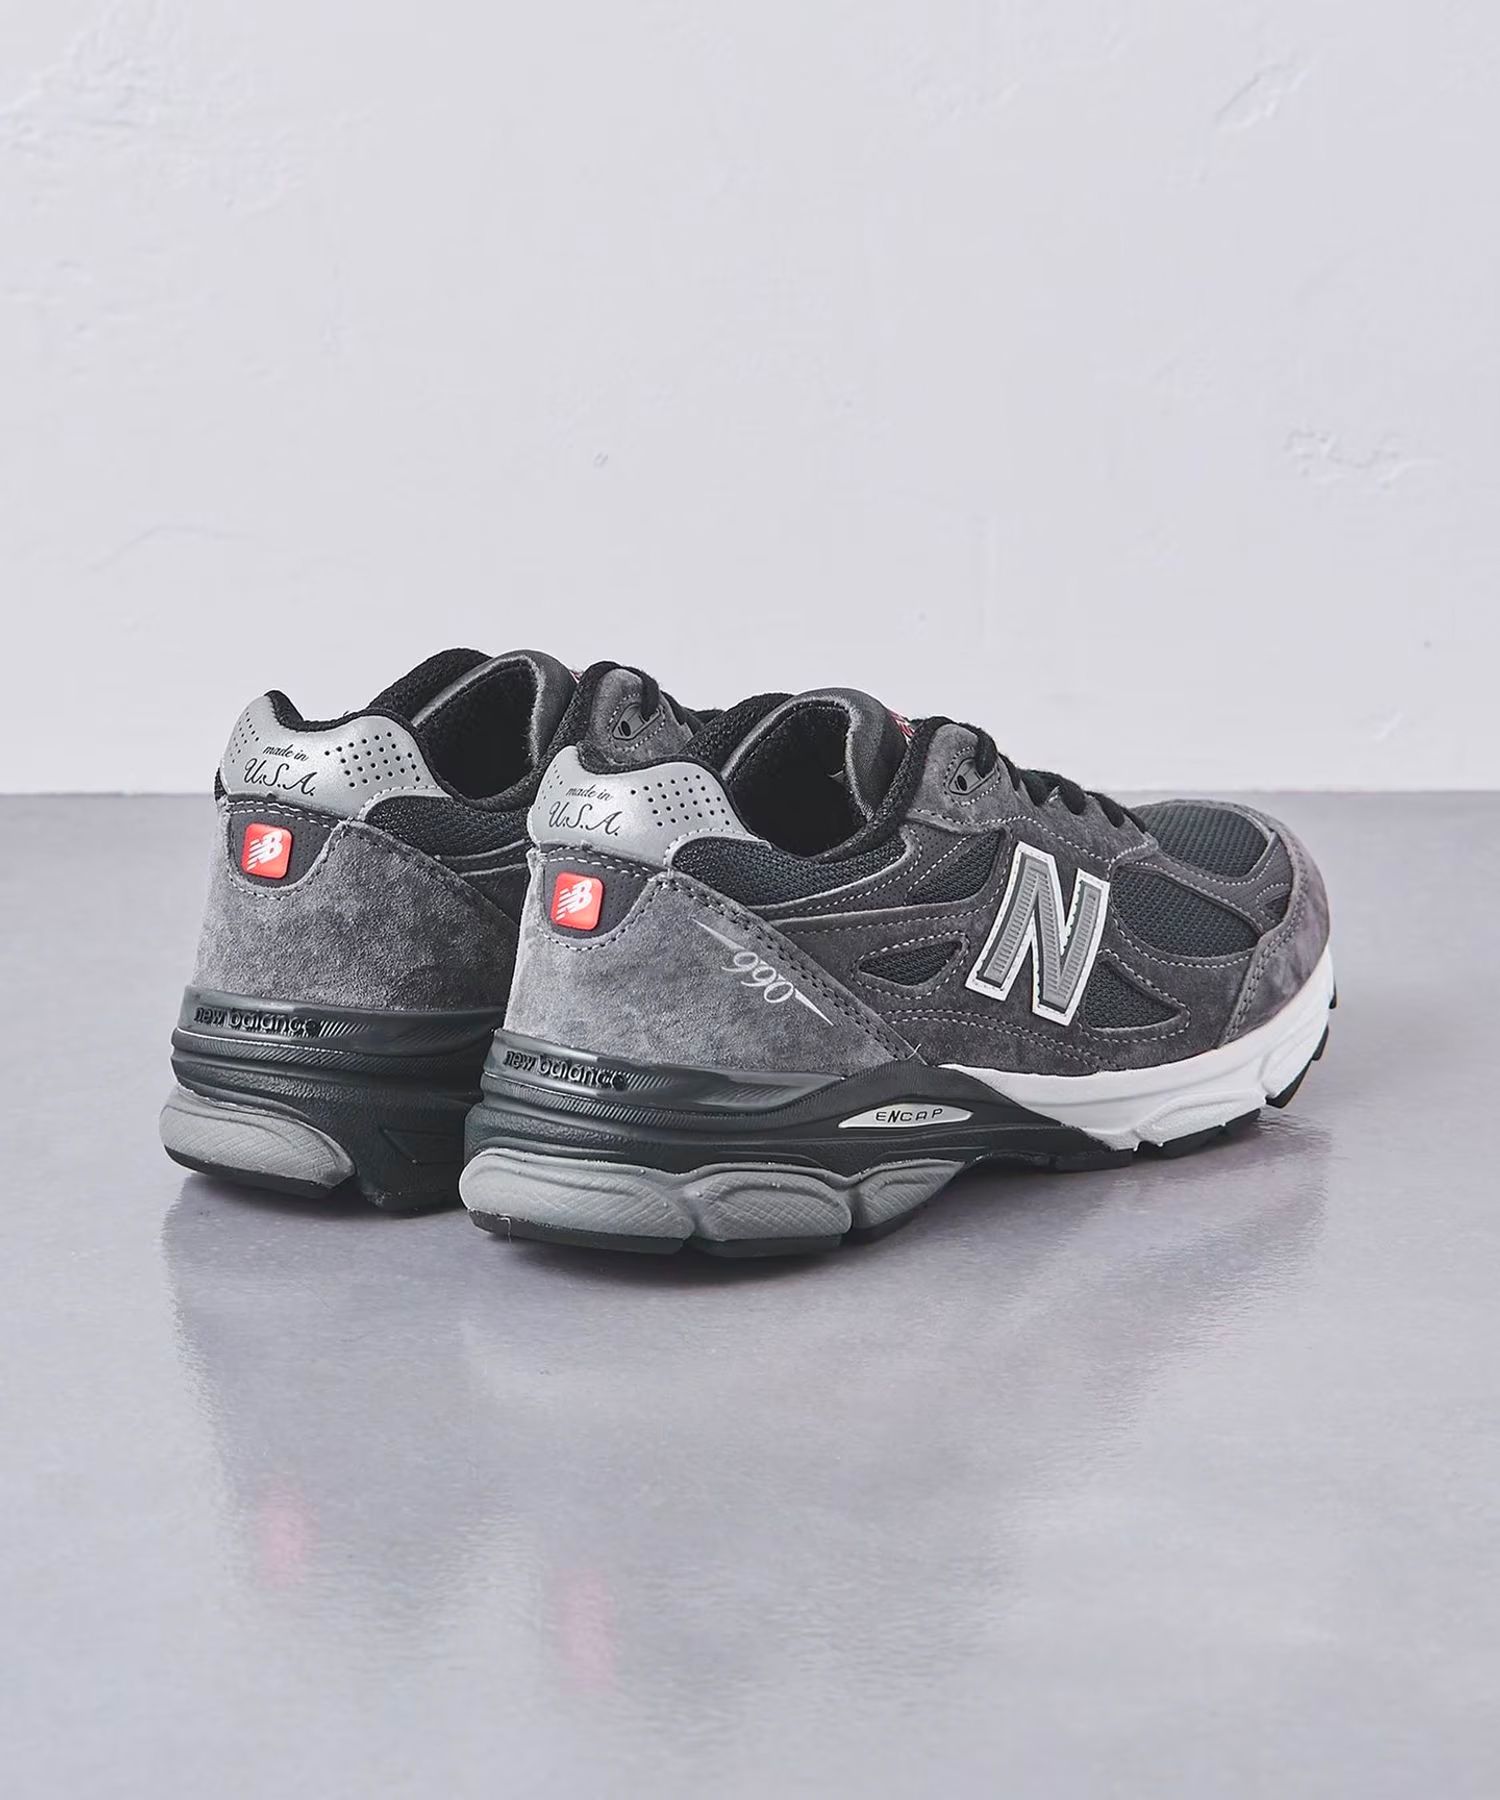 UNITED ARROWS Reunite with New Balance on the 990v3 | House of Heat°